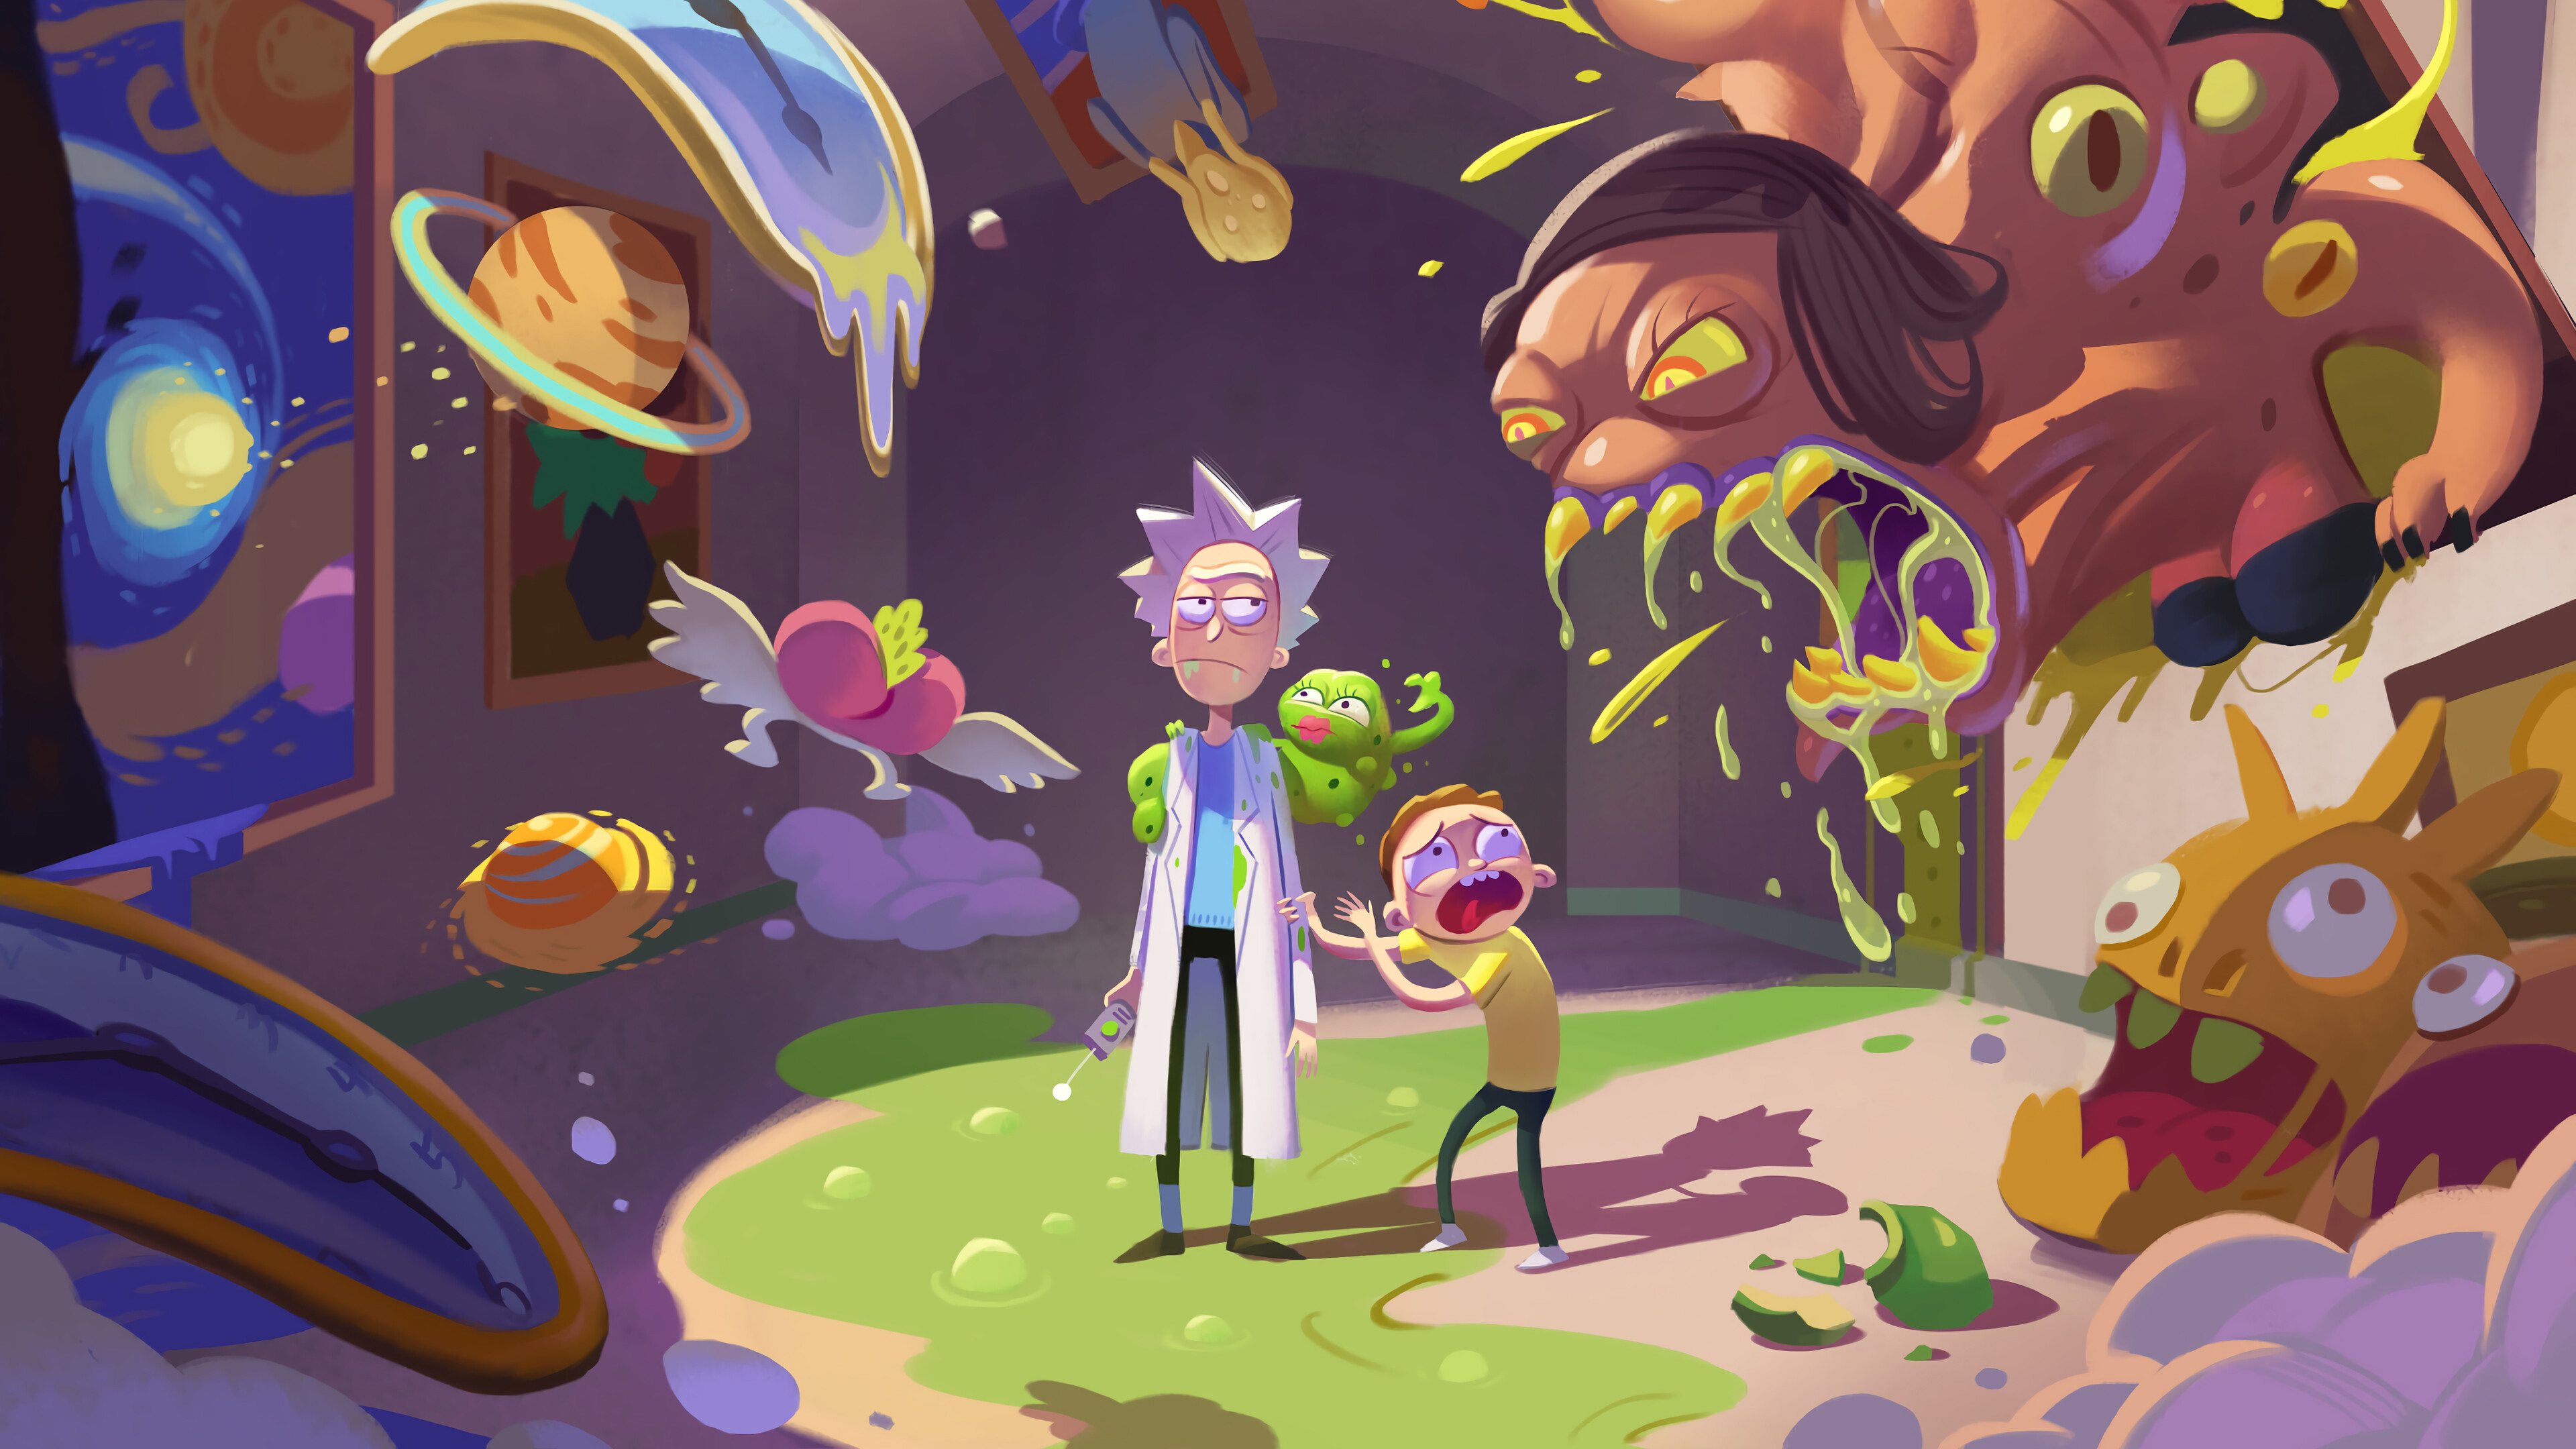 Rick and Morty: Season 4, Created by Justin Roiland and Dan Harmon. 3840x2160 4K Background.